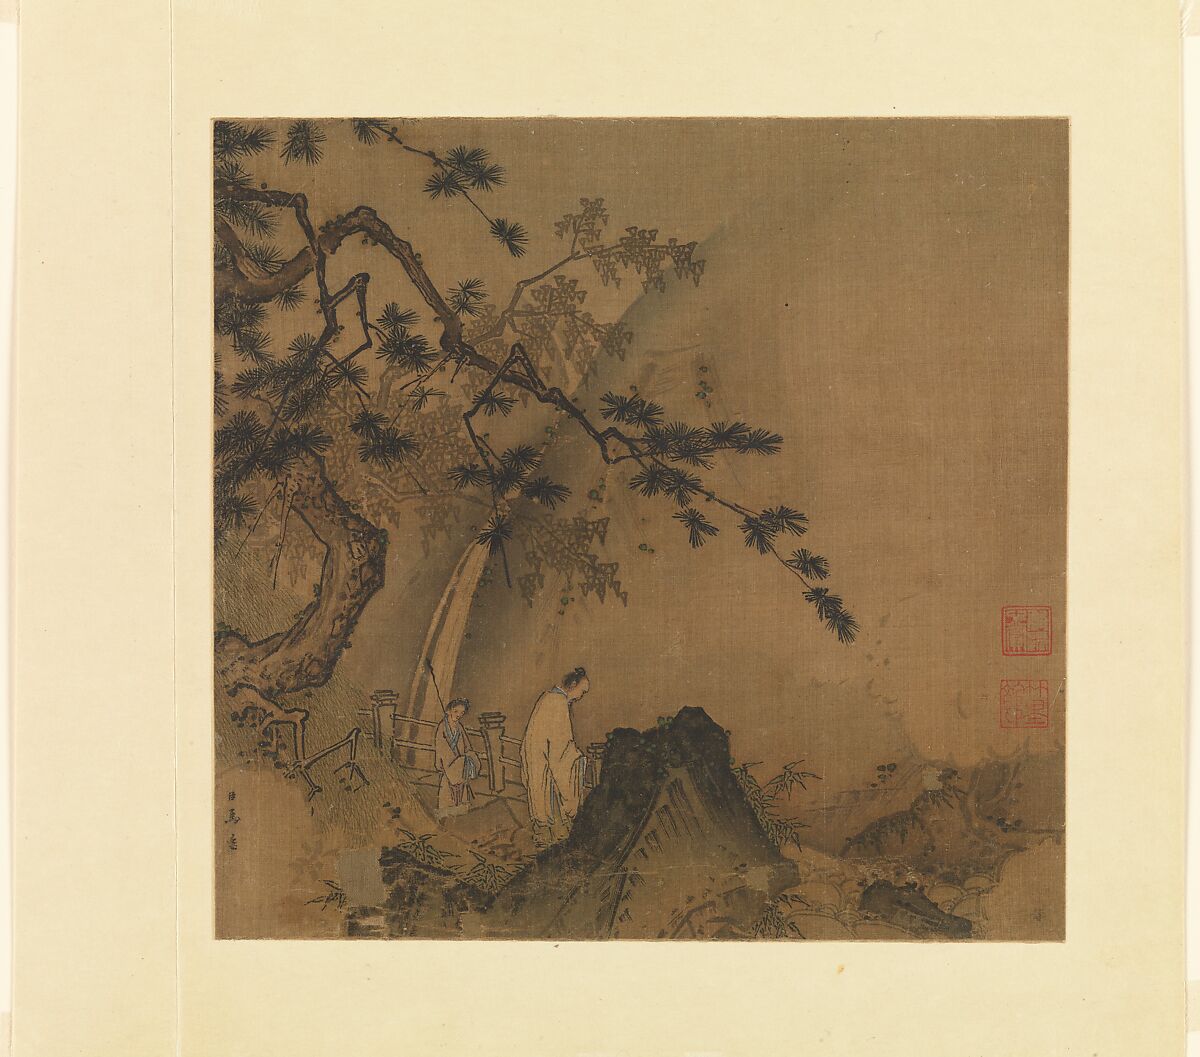 Scholar viewing a waterfall, Ma Yuan (Chinese, active ca. 1190â€“1225), Album leaf; ink and color on silk, China